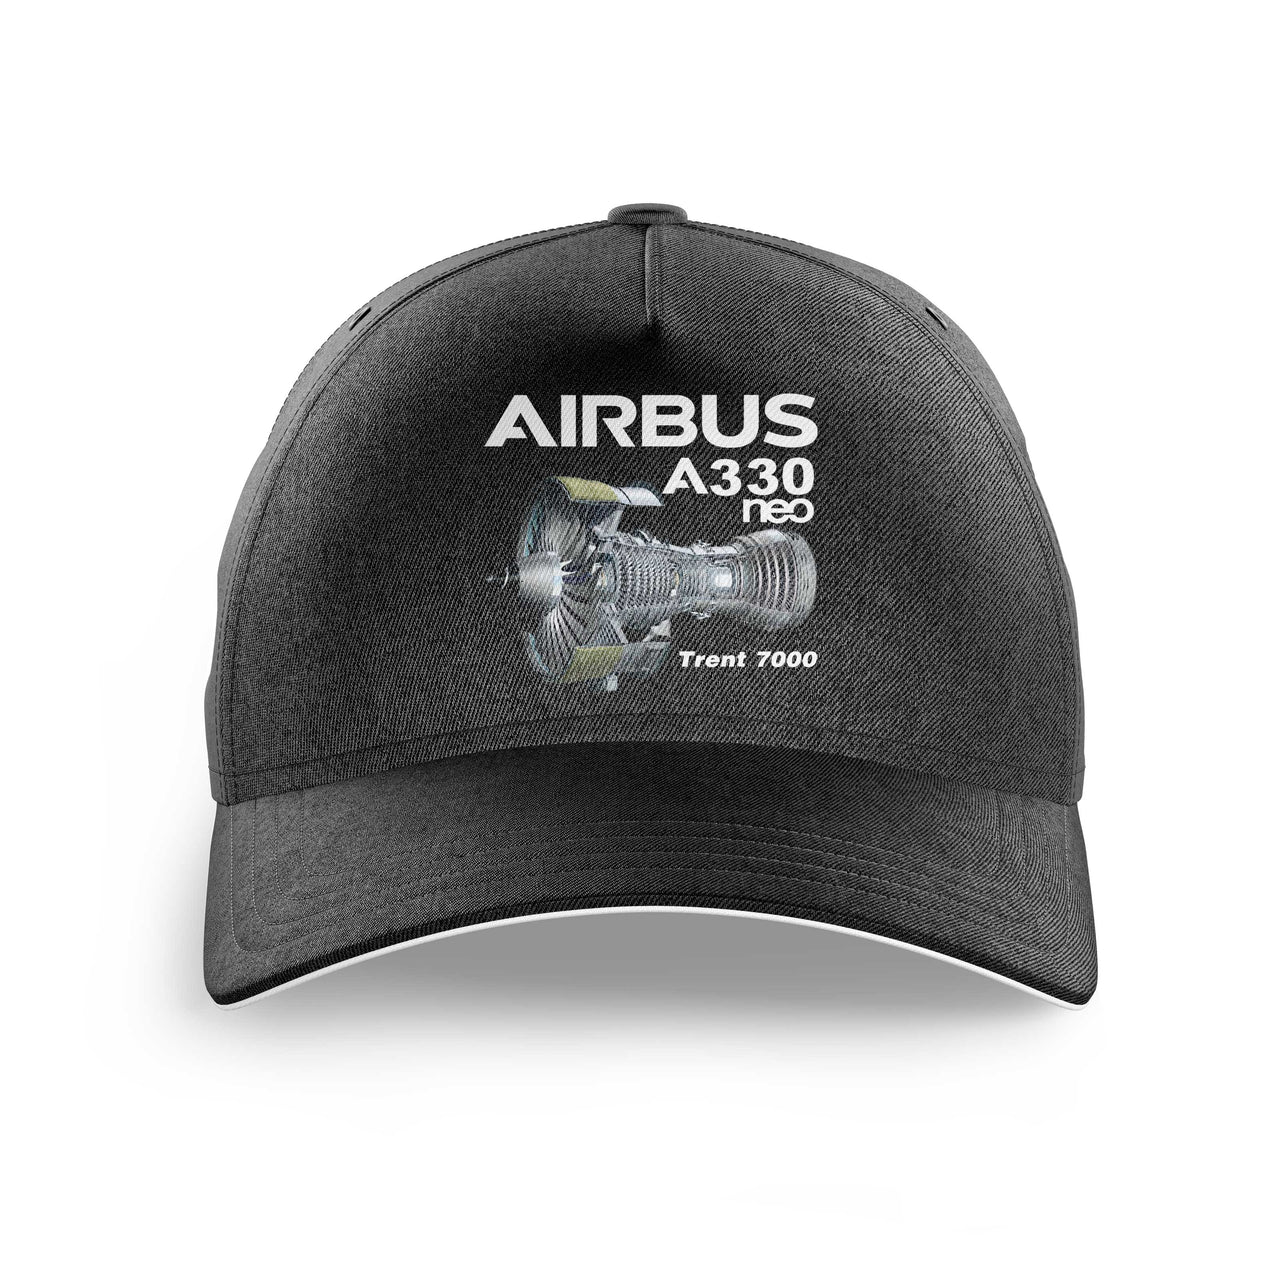 Airbus A330neo & Trent 7000 Engine Printed Hats